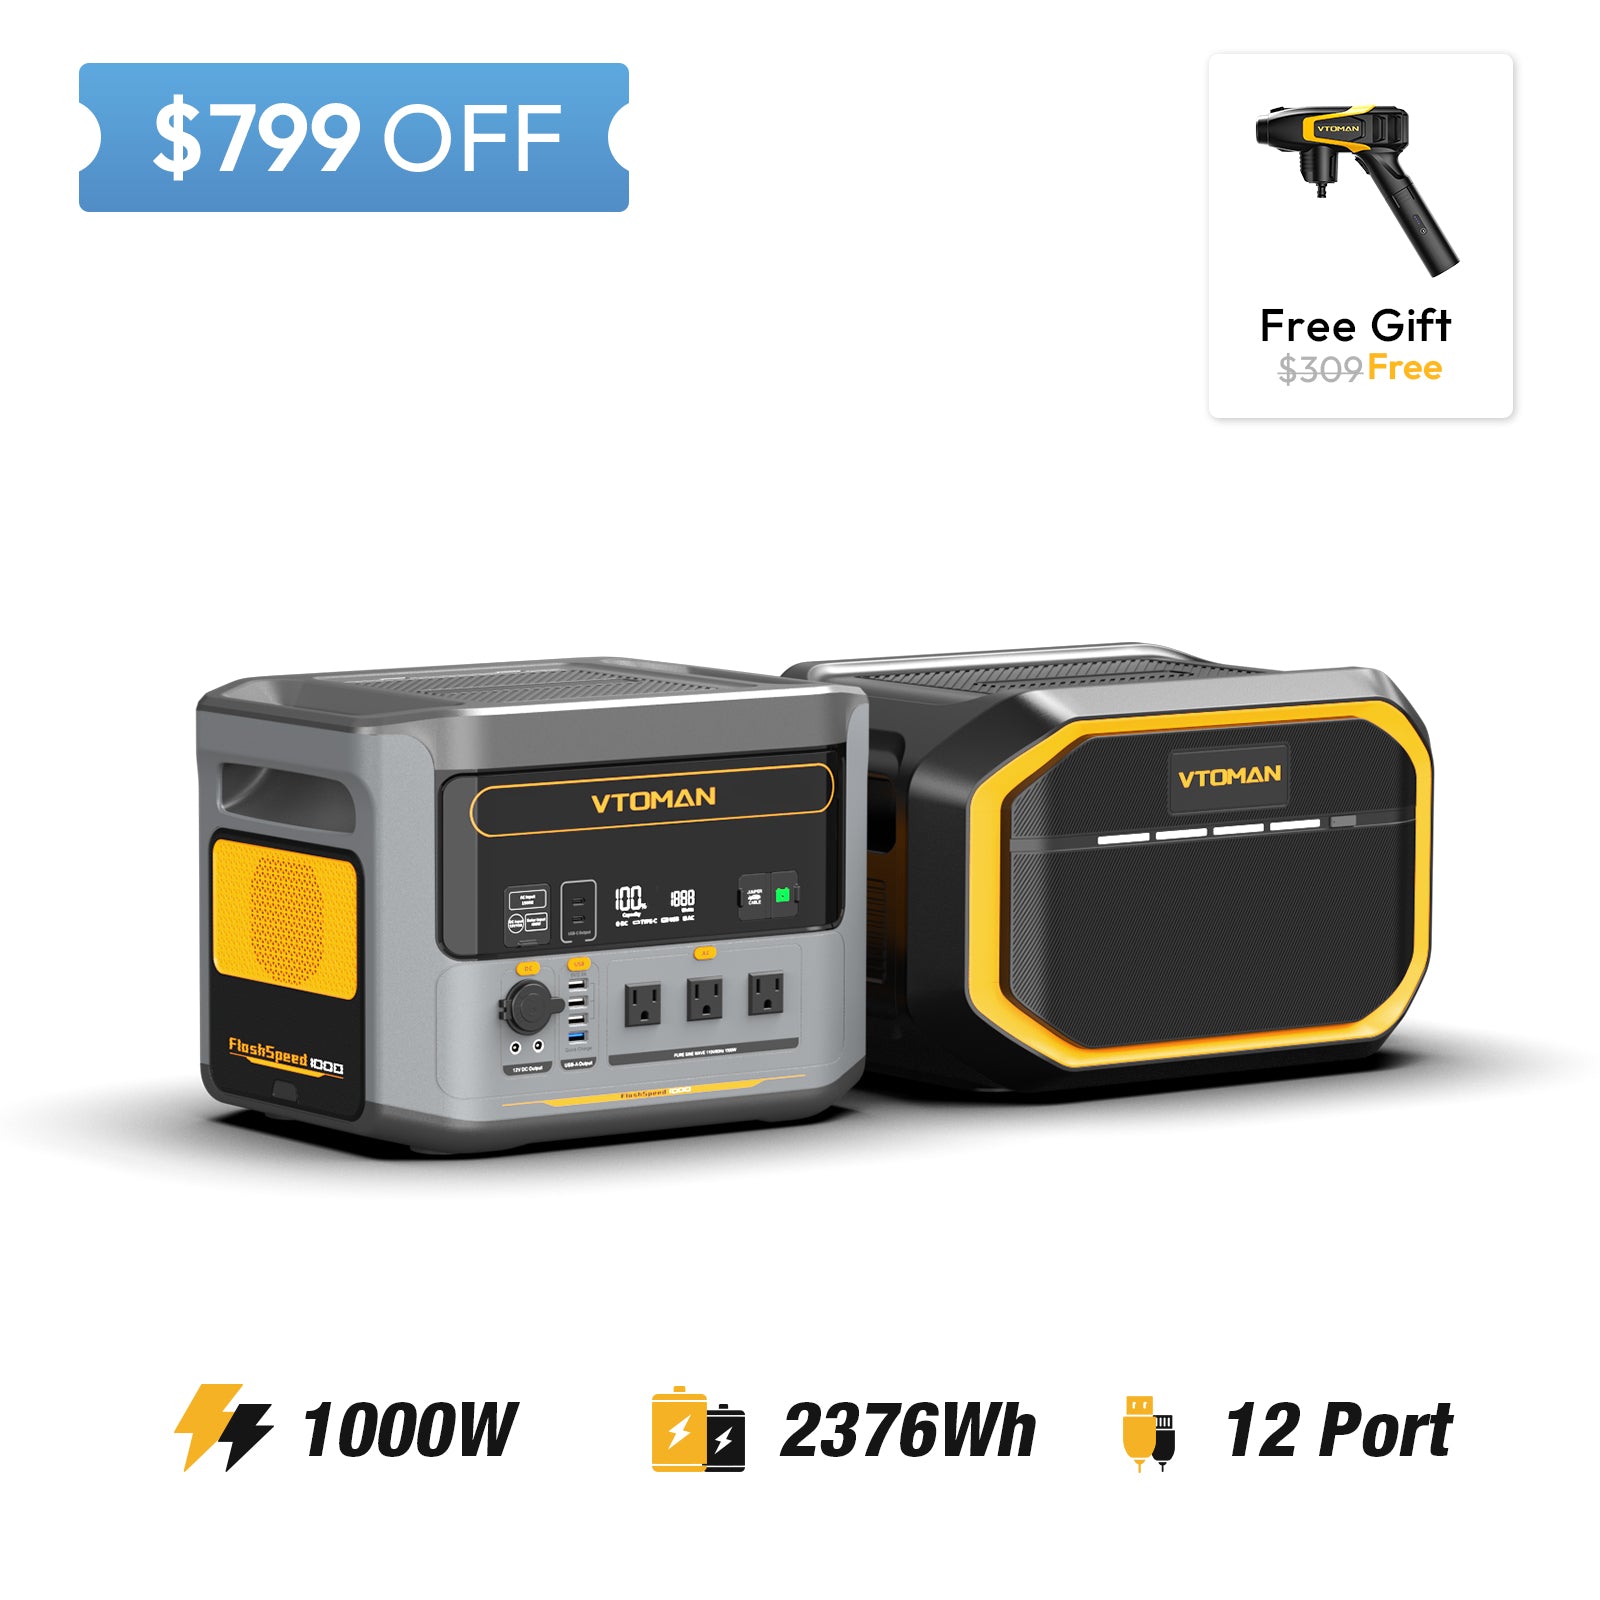 FlashSpeed 1000 and 1548Wh extra battery save $799